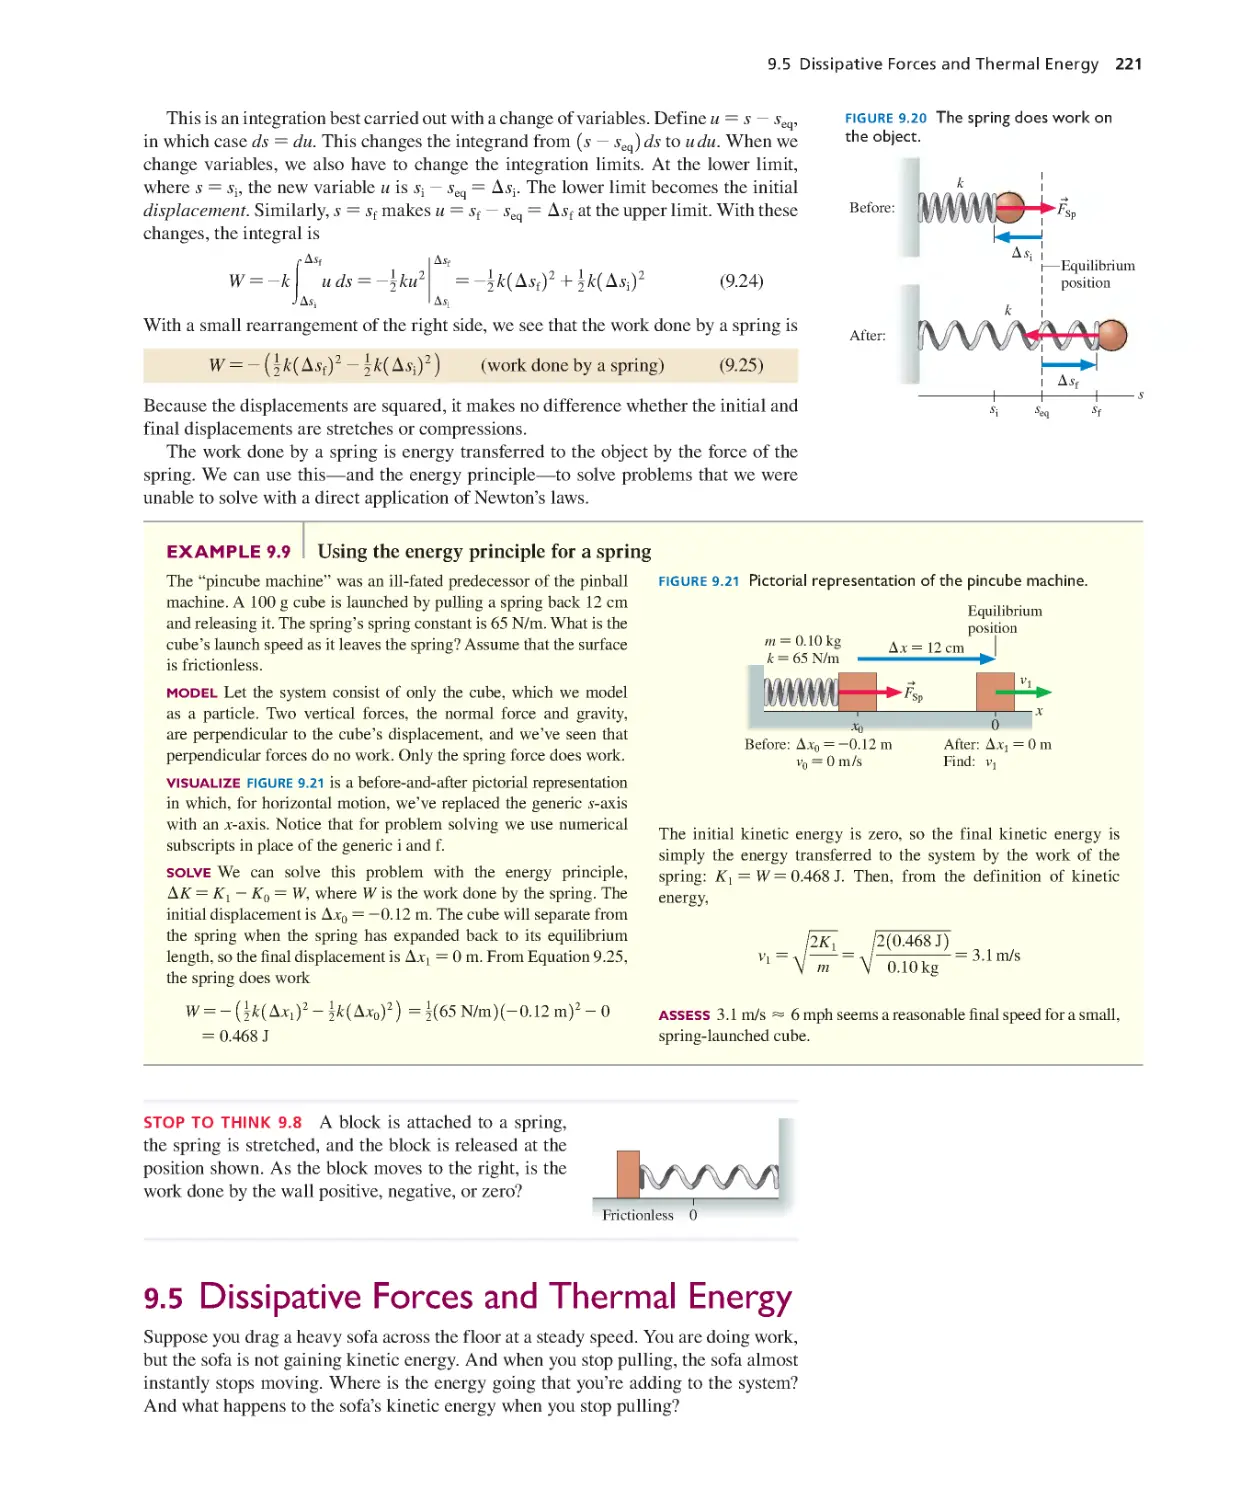 9.5. Dissipative Forces and Thermal Energy